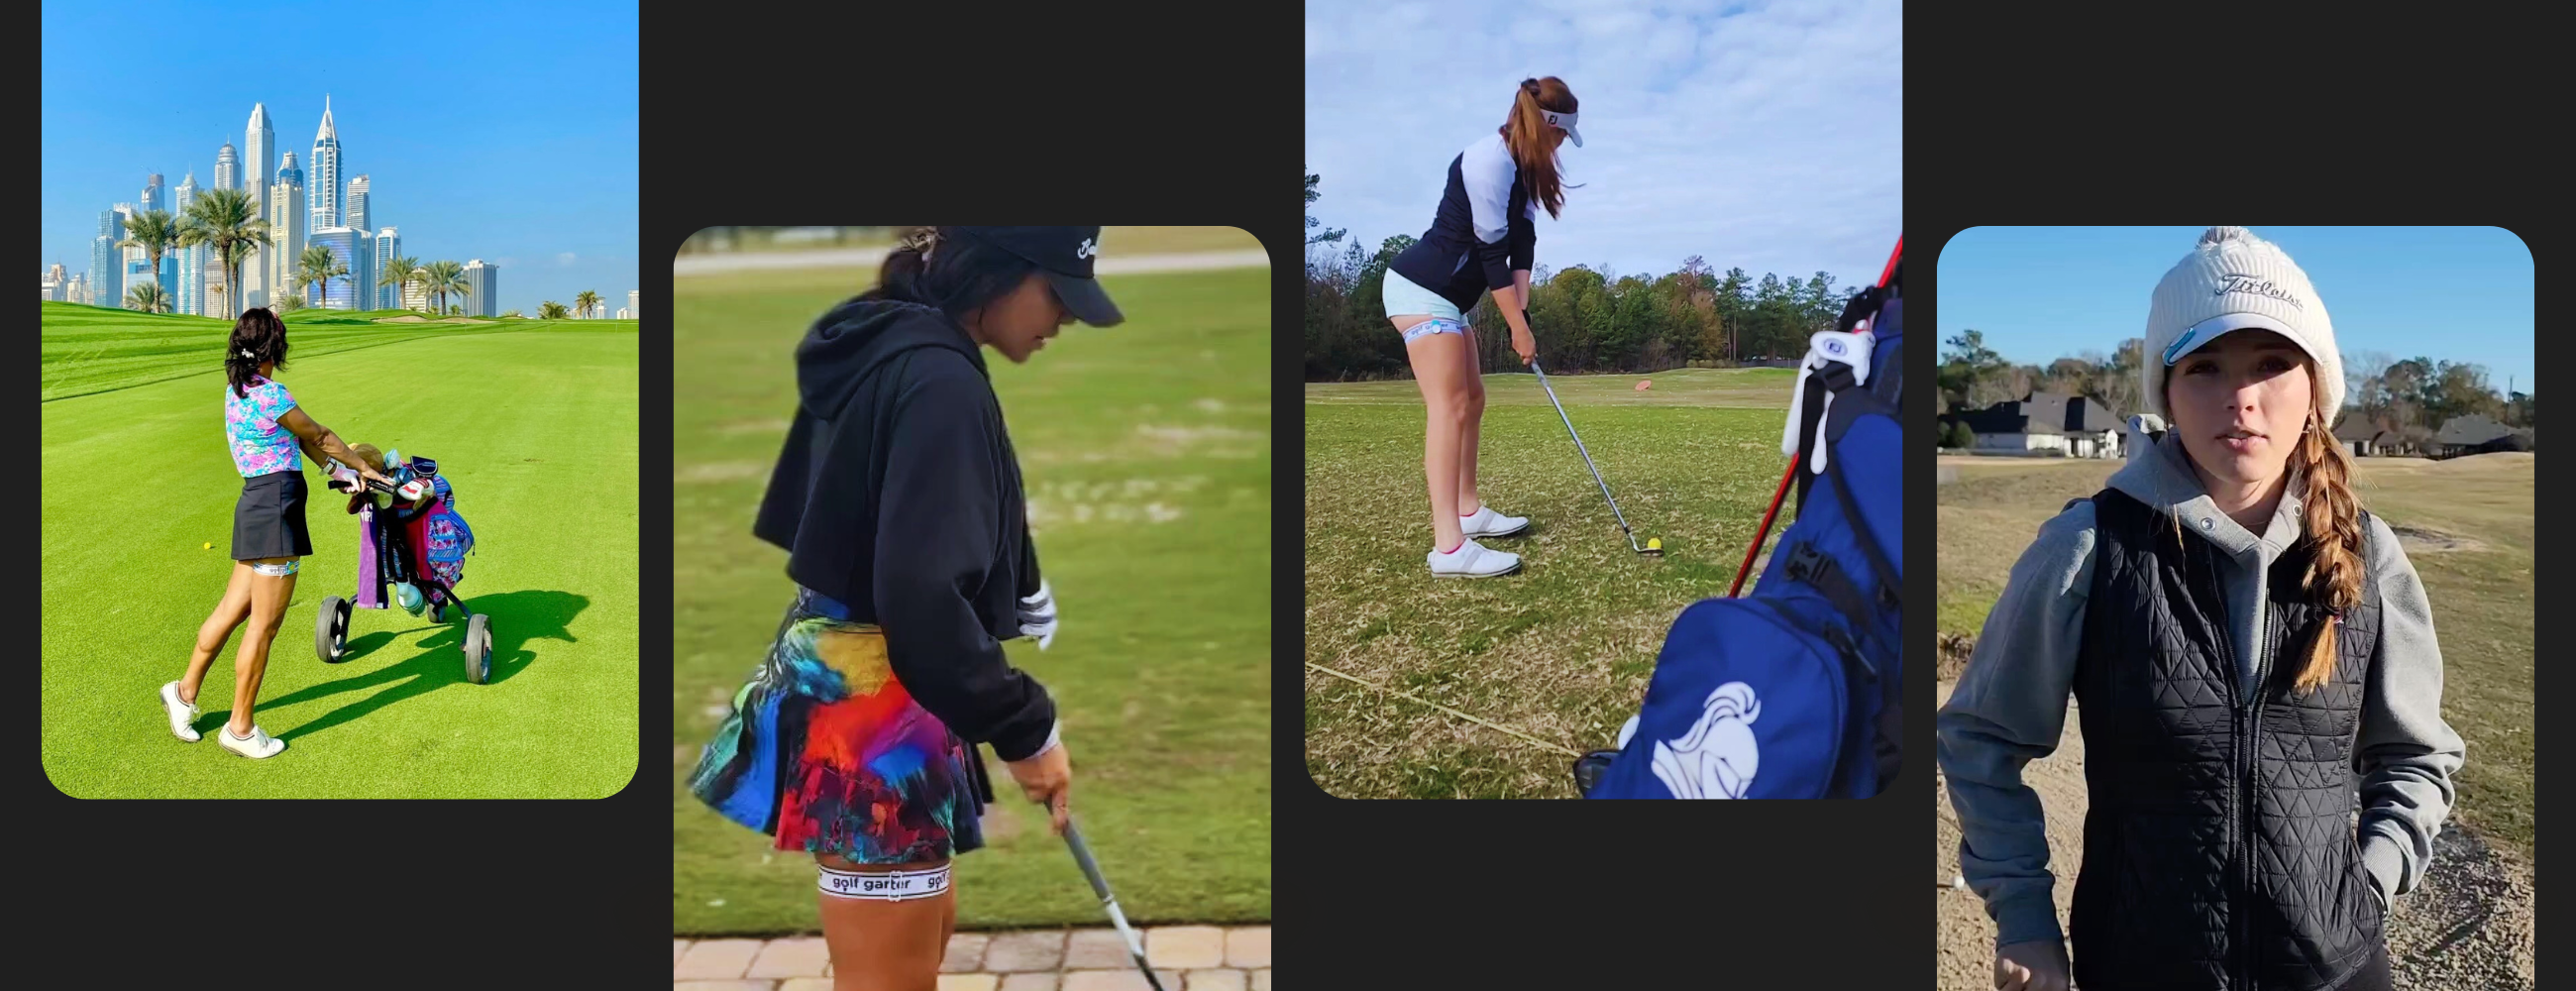 This is a collage of different female golfers out on the course with their Golf Garters visible. One girl is wearing a golf garter ball marker on her hat. 